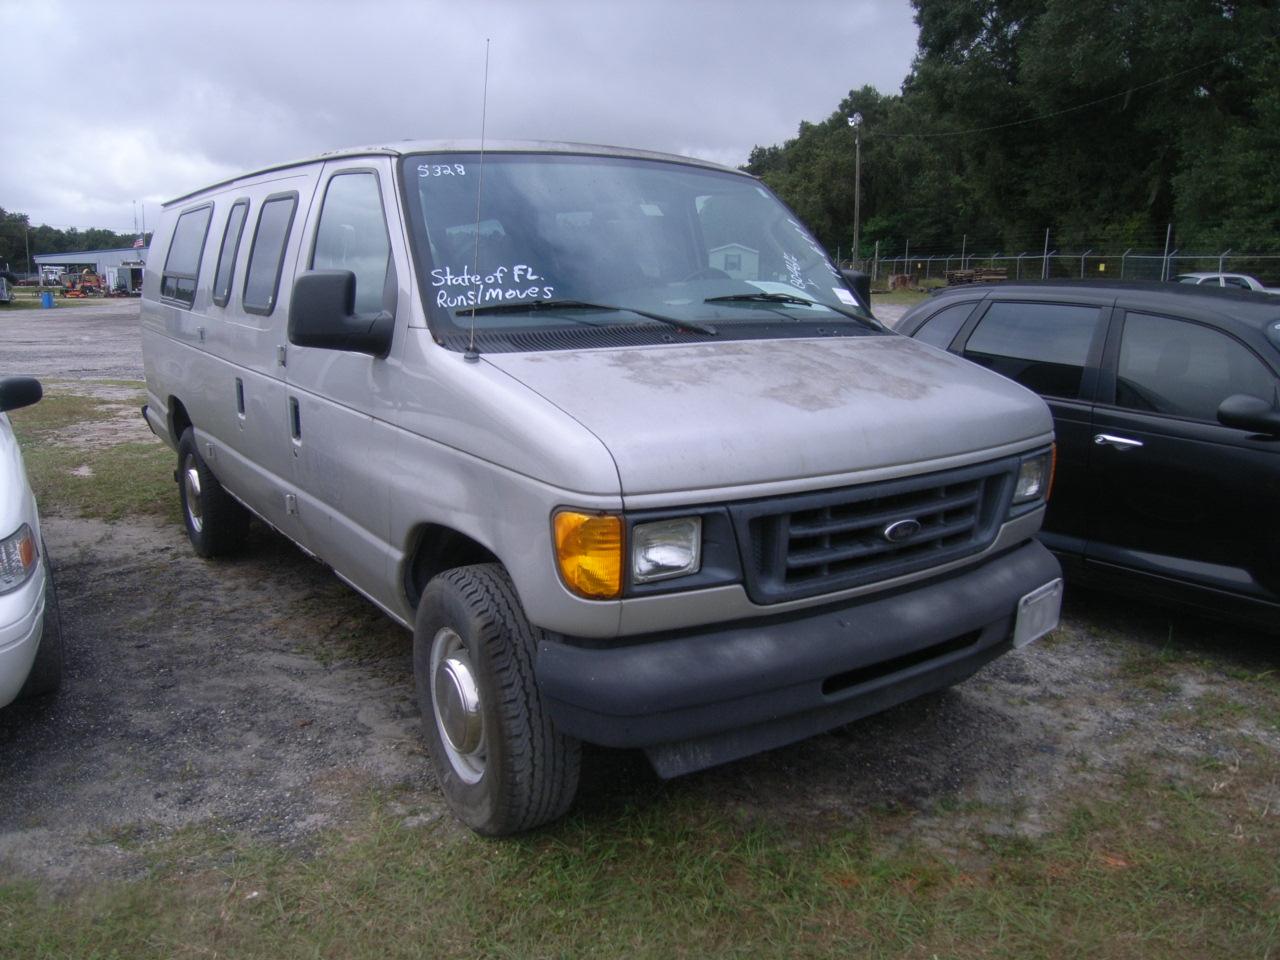 12-06111 (Cars-Van 3D)  Seller:Florida State FWC 2003 FORD E350